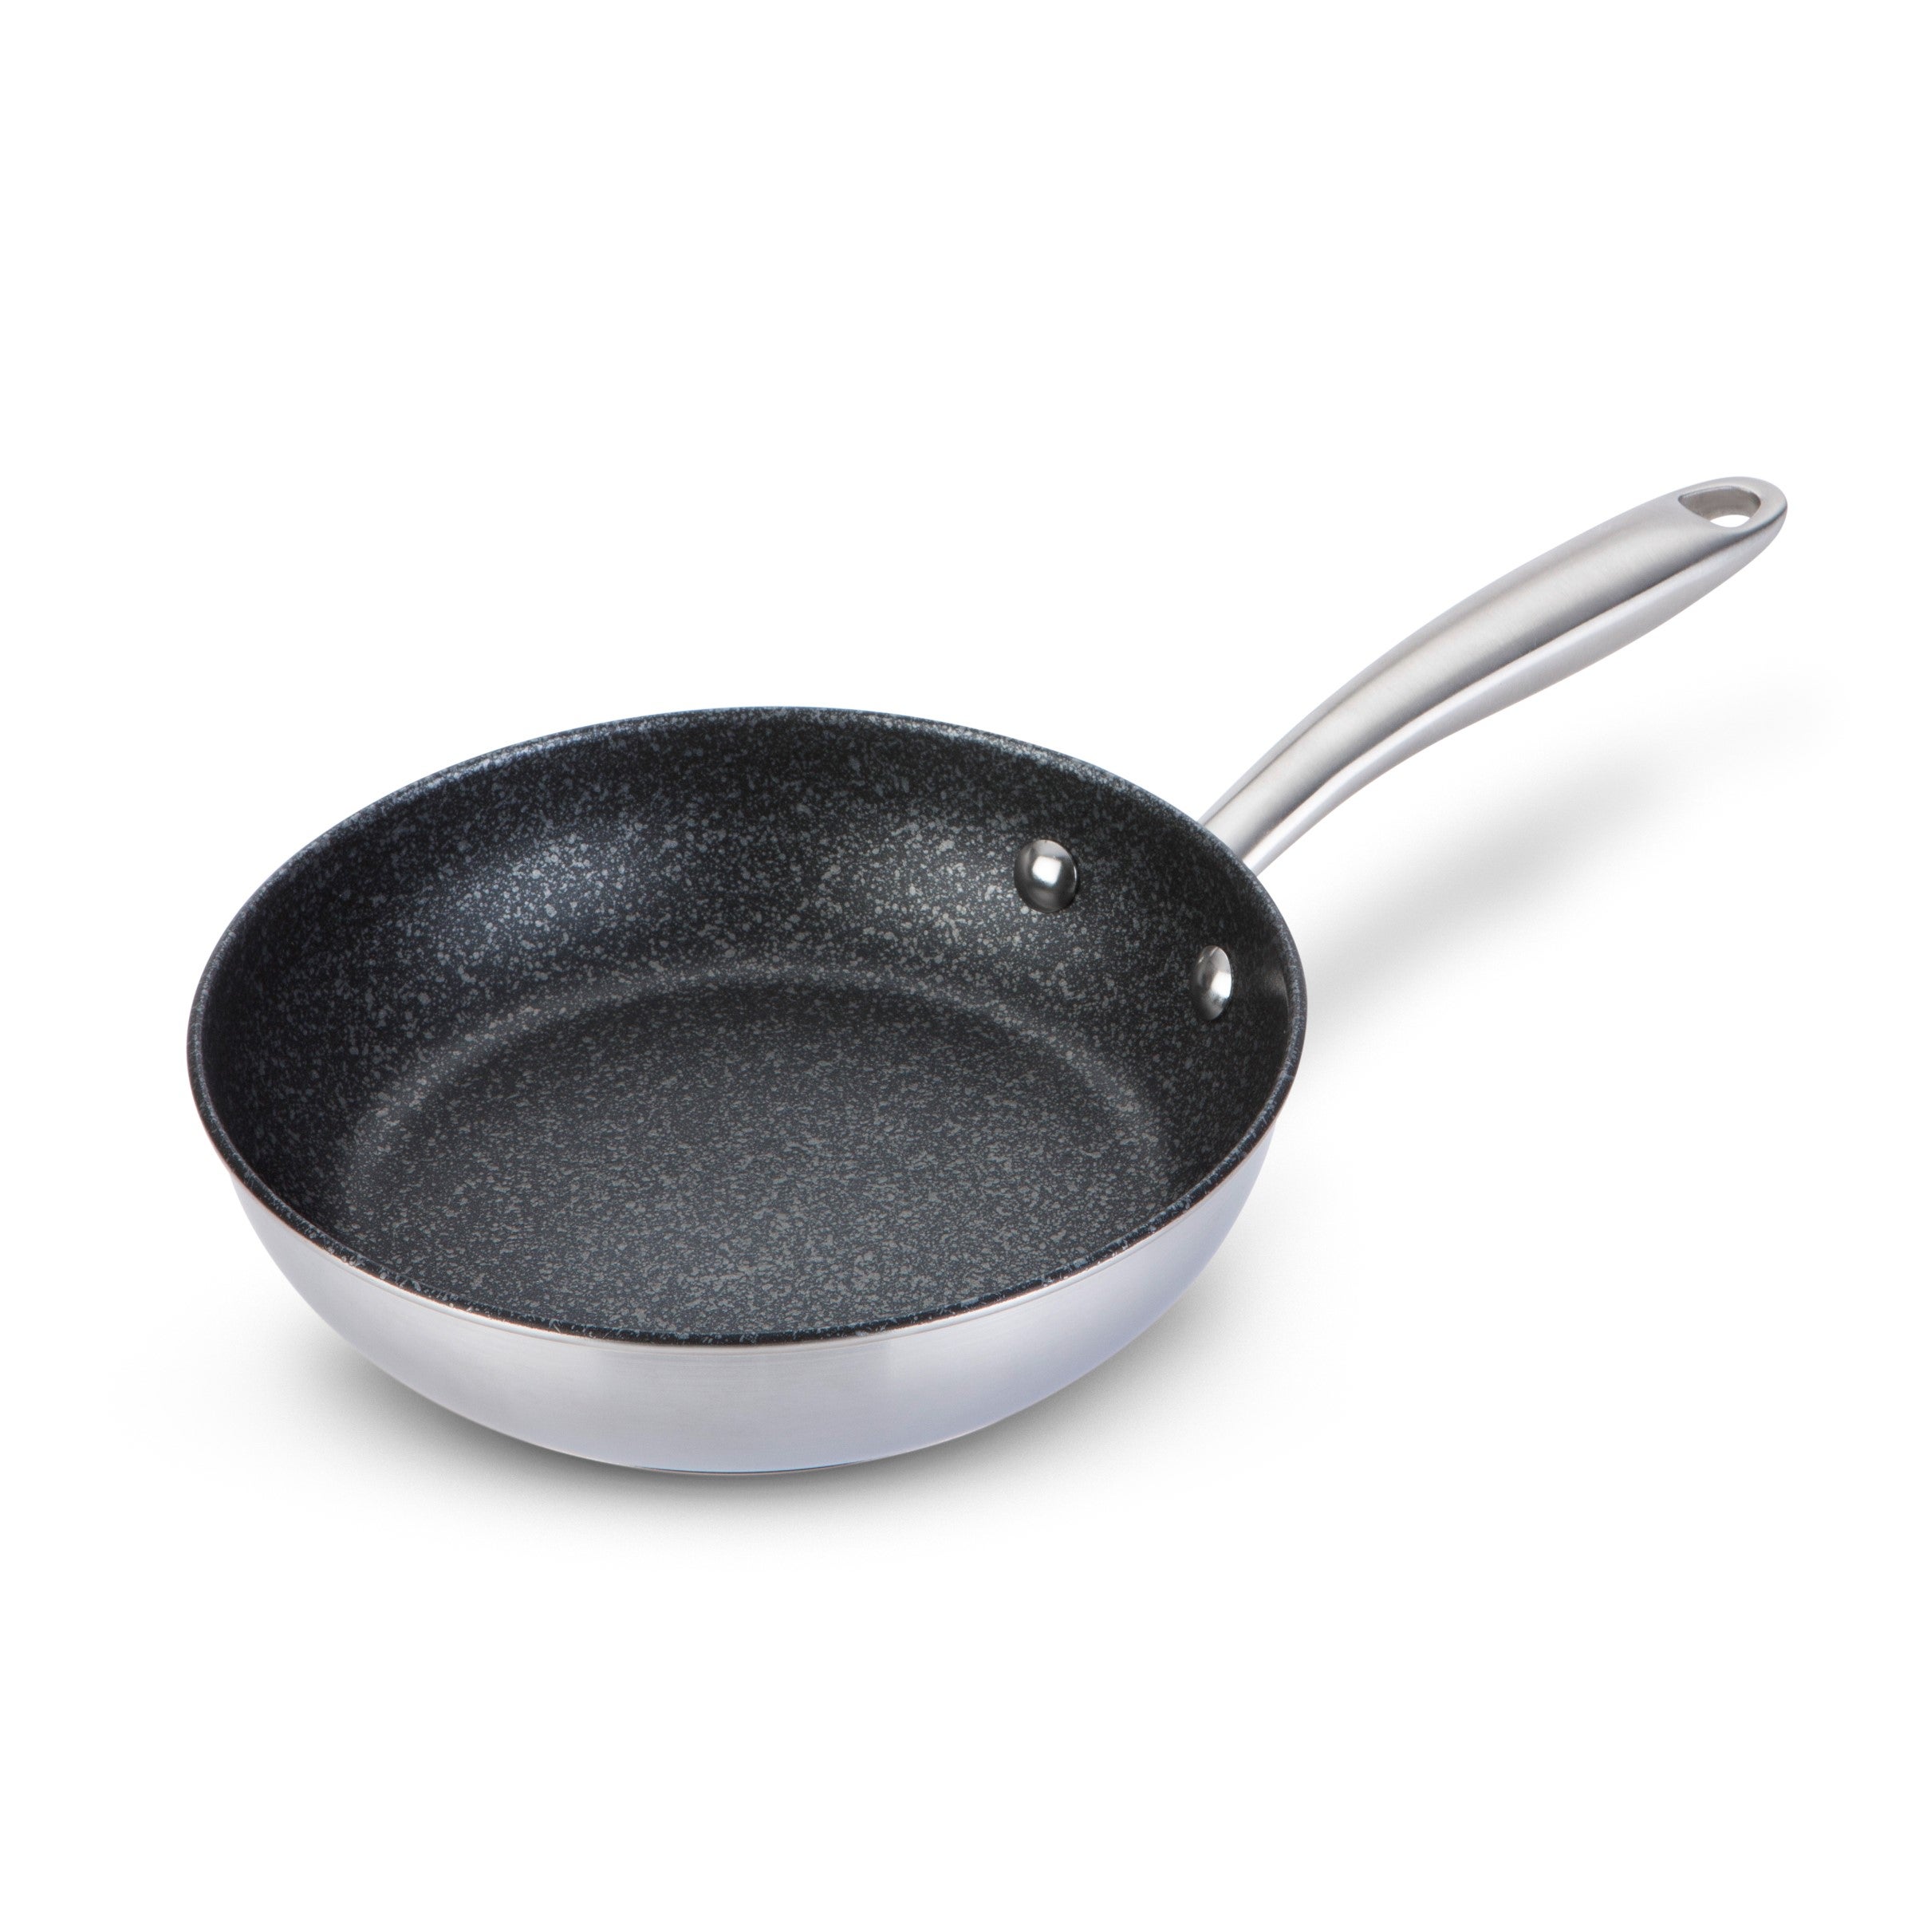 Prestige Scratch Guard Non-Stick Stainless Steel Frying Pan, 21cm